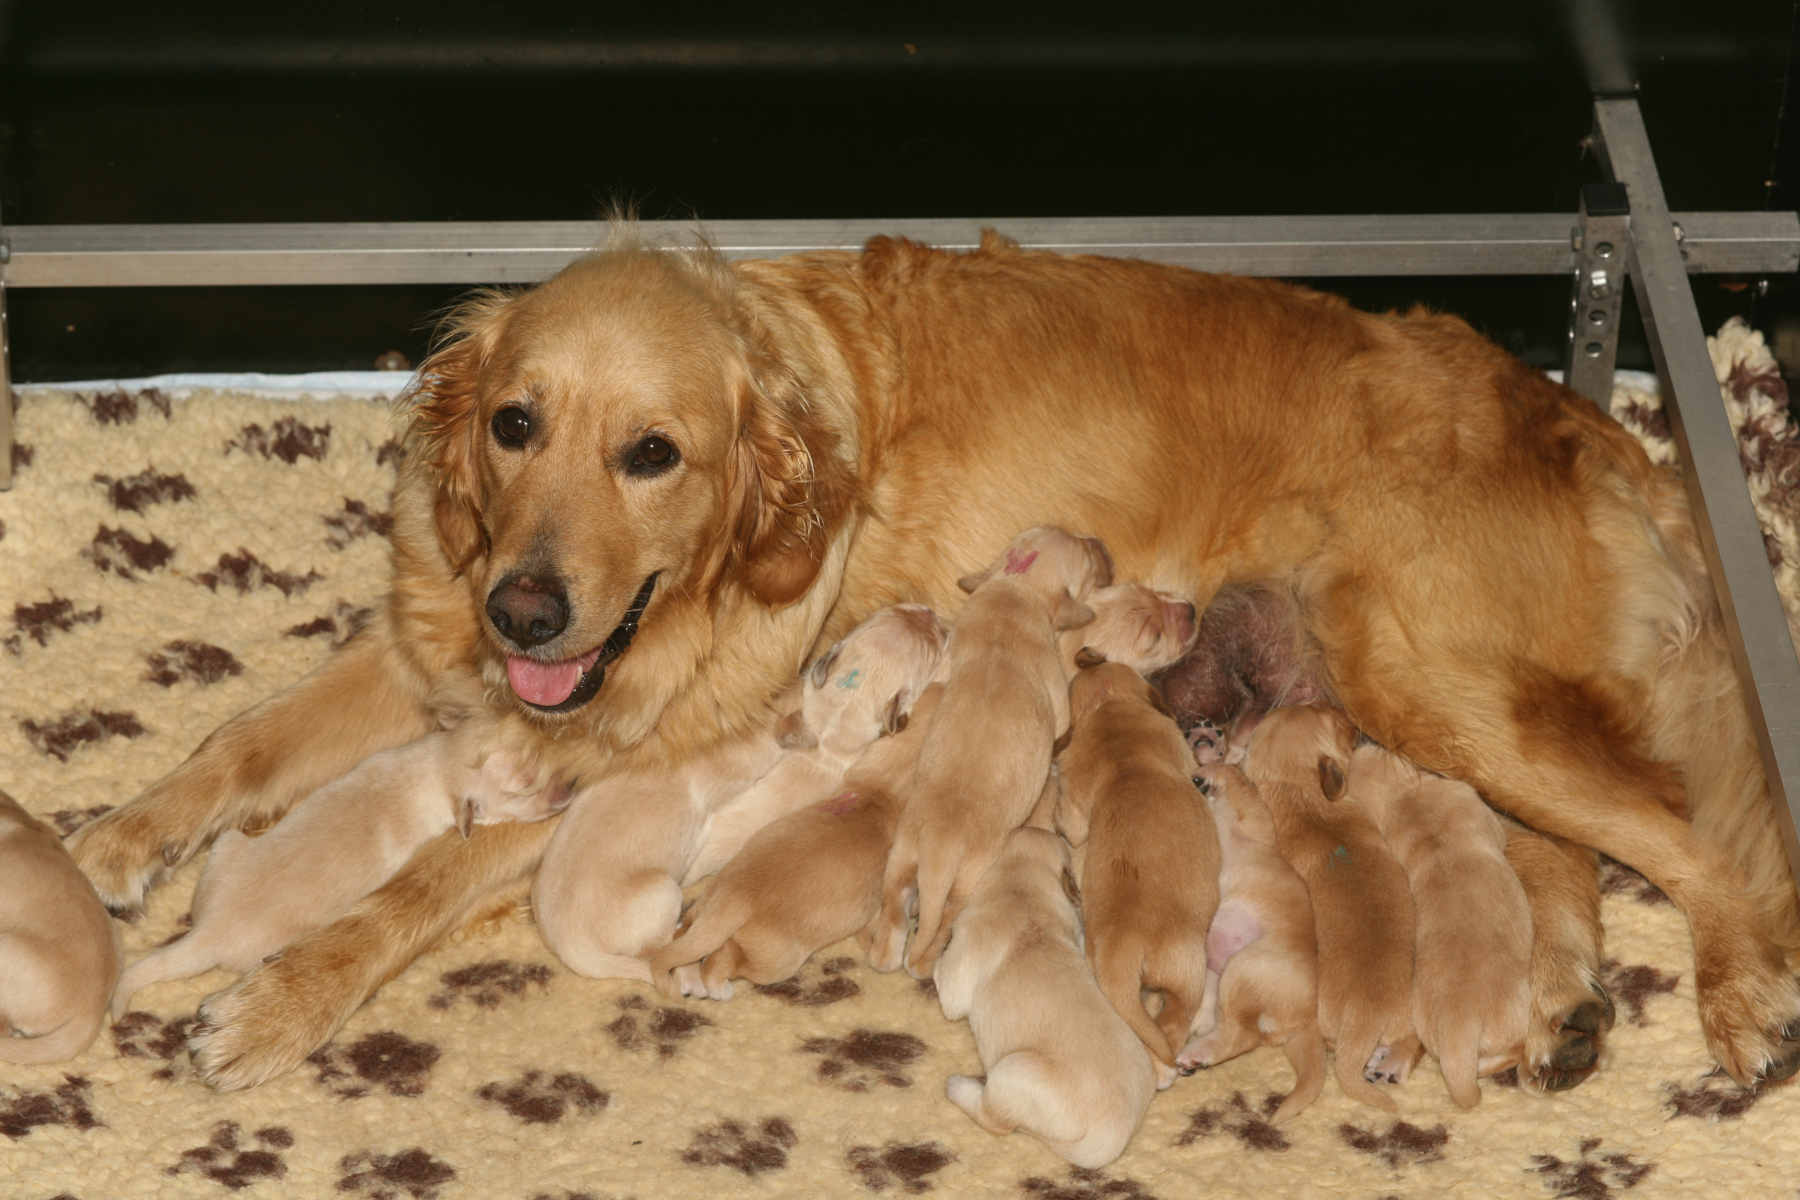 Florence with 1 week old puppies